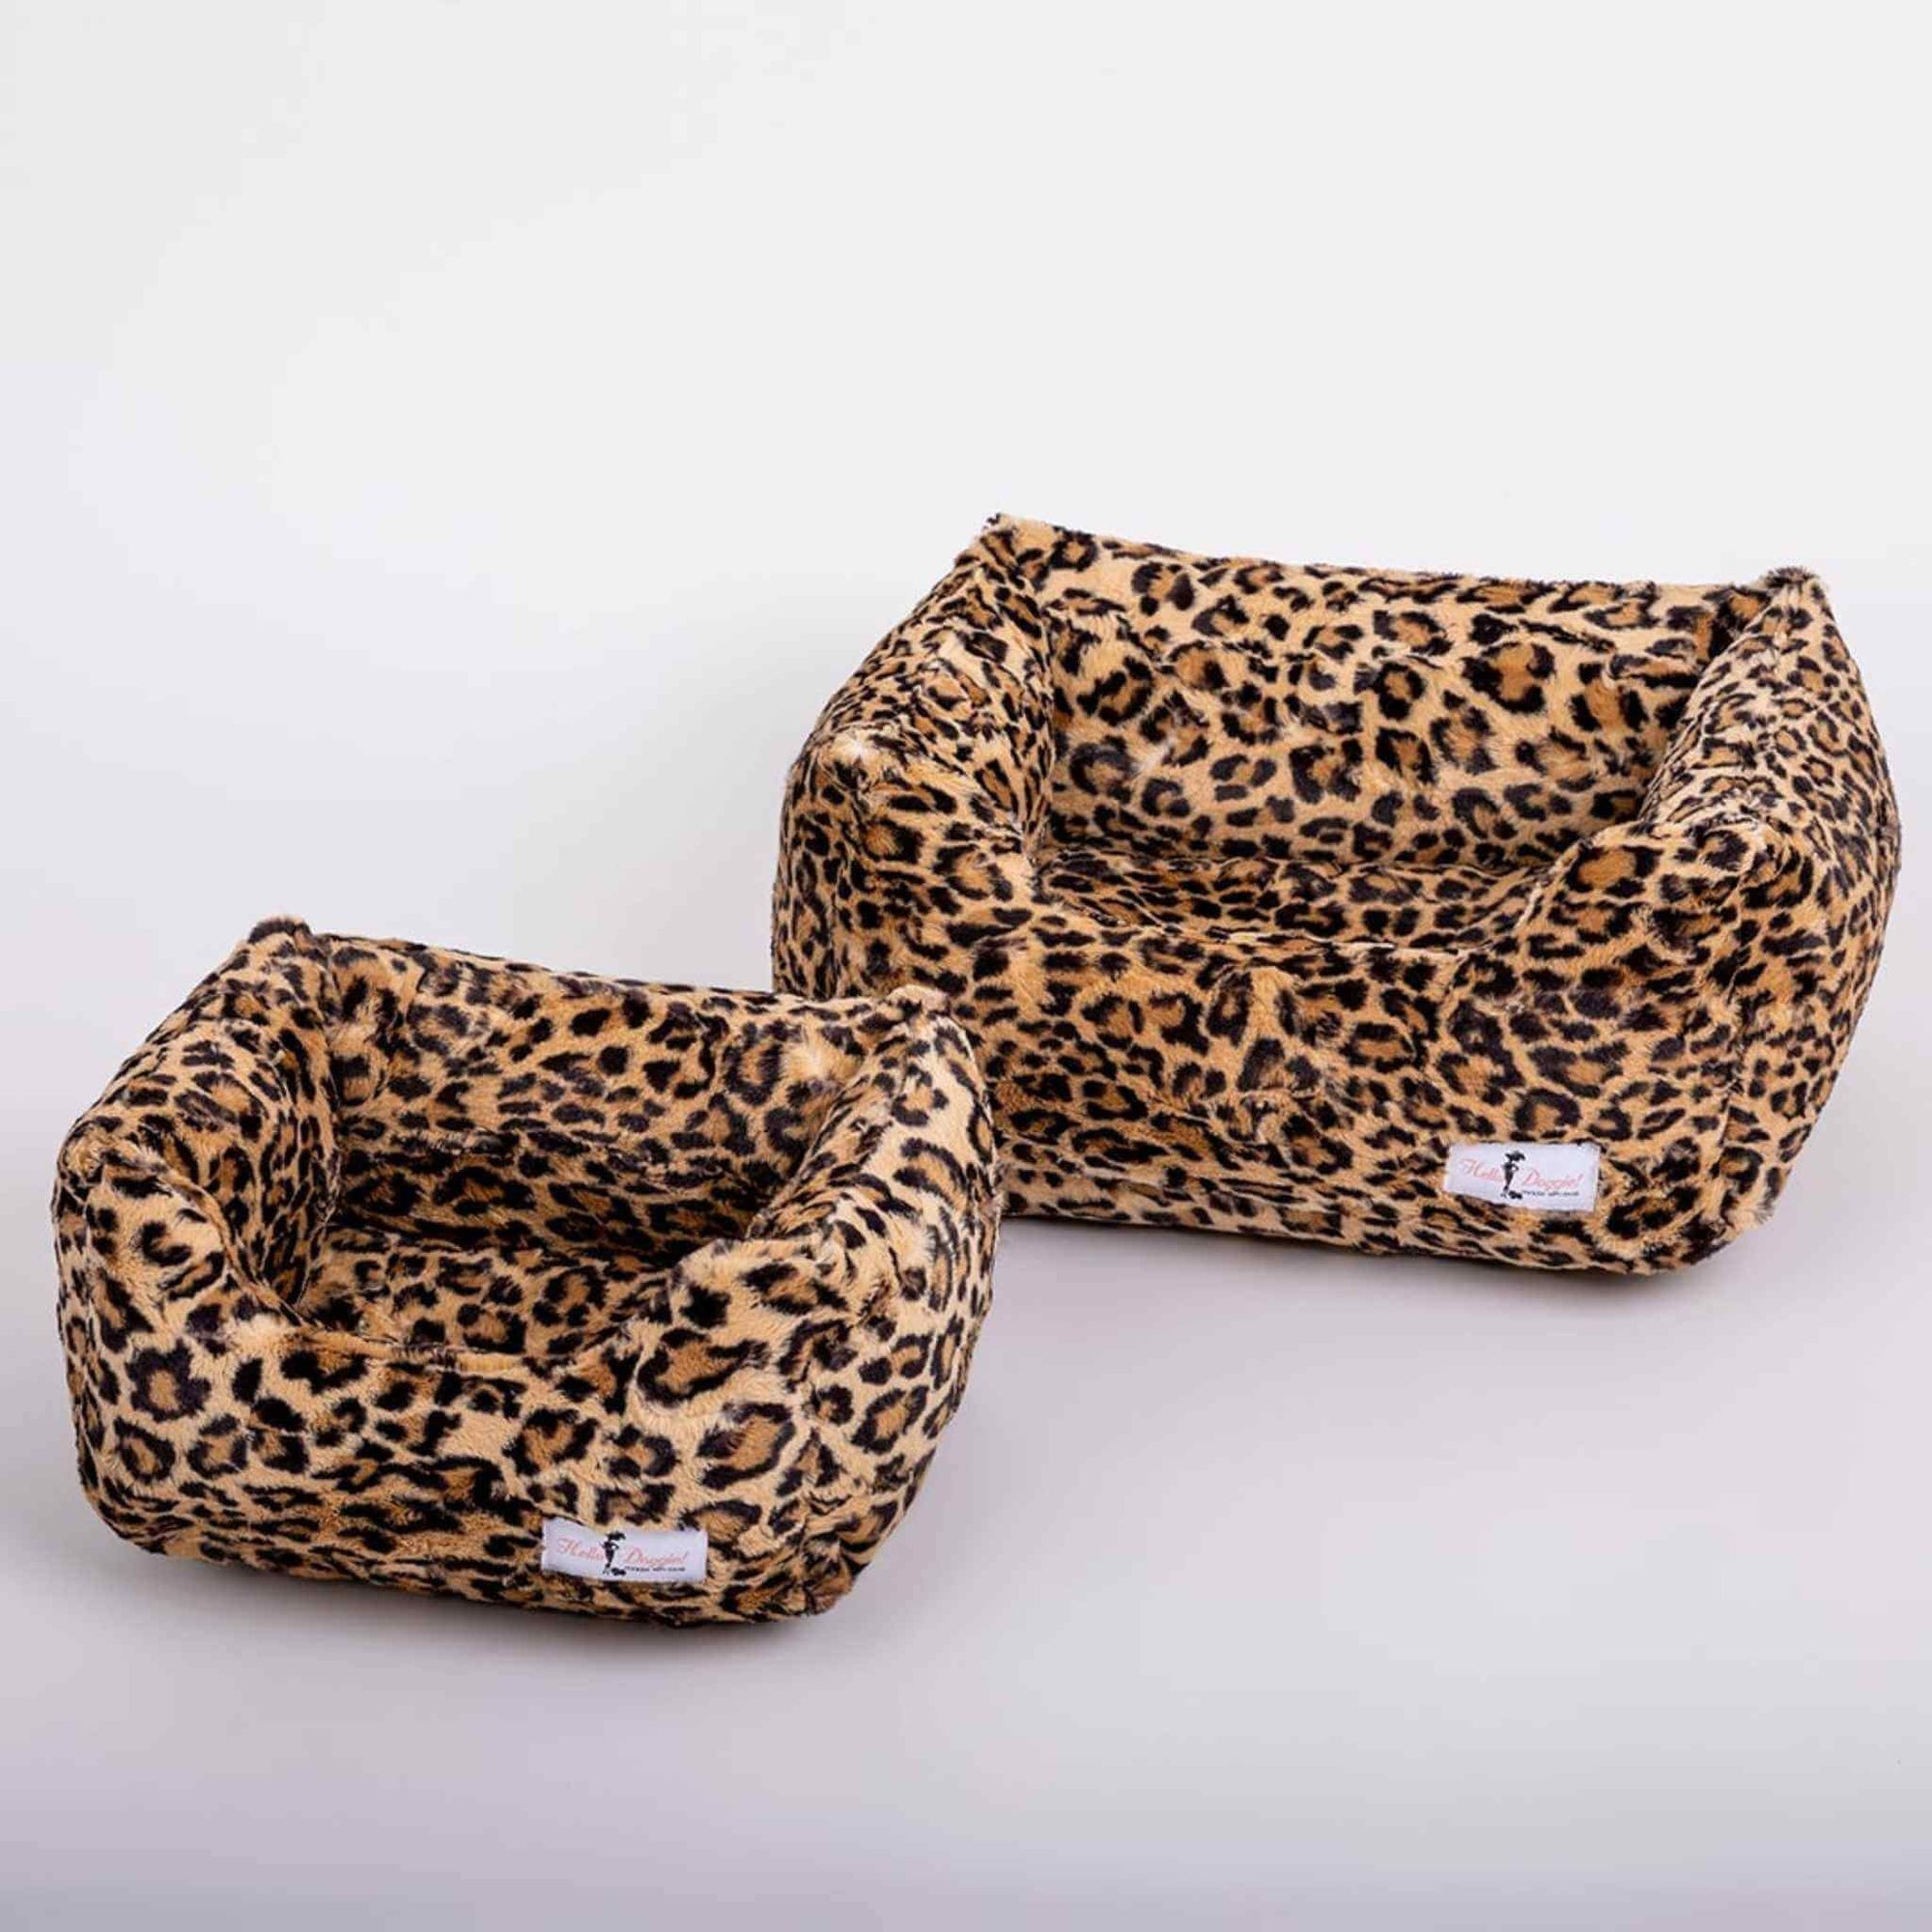 Hello Doggie Cashemere Leopard Print Luxury Dog Bed - Side by Side